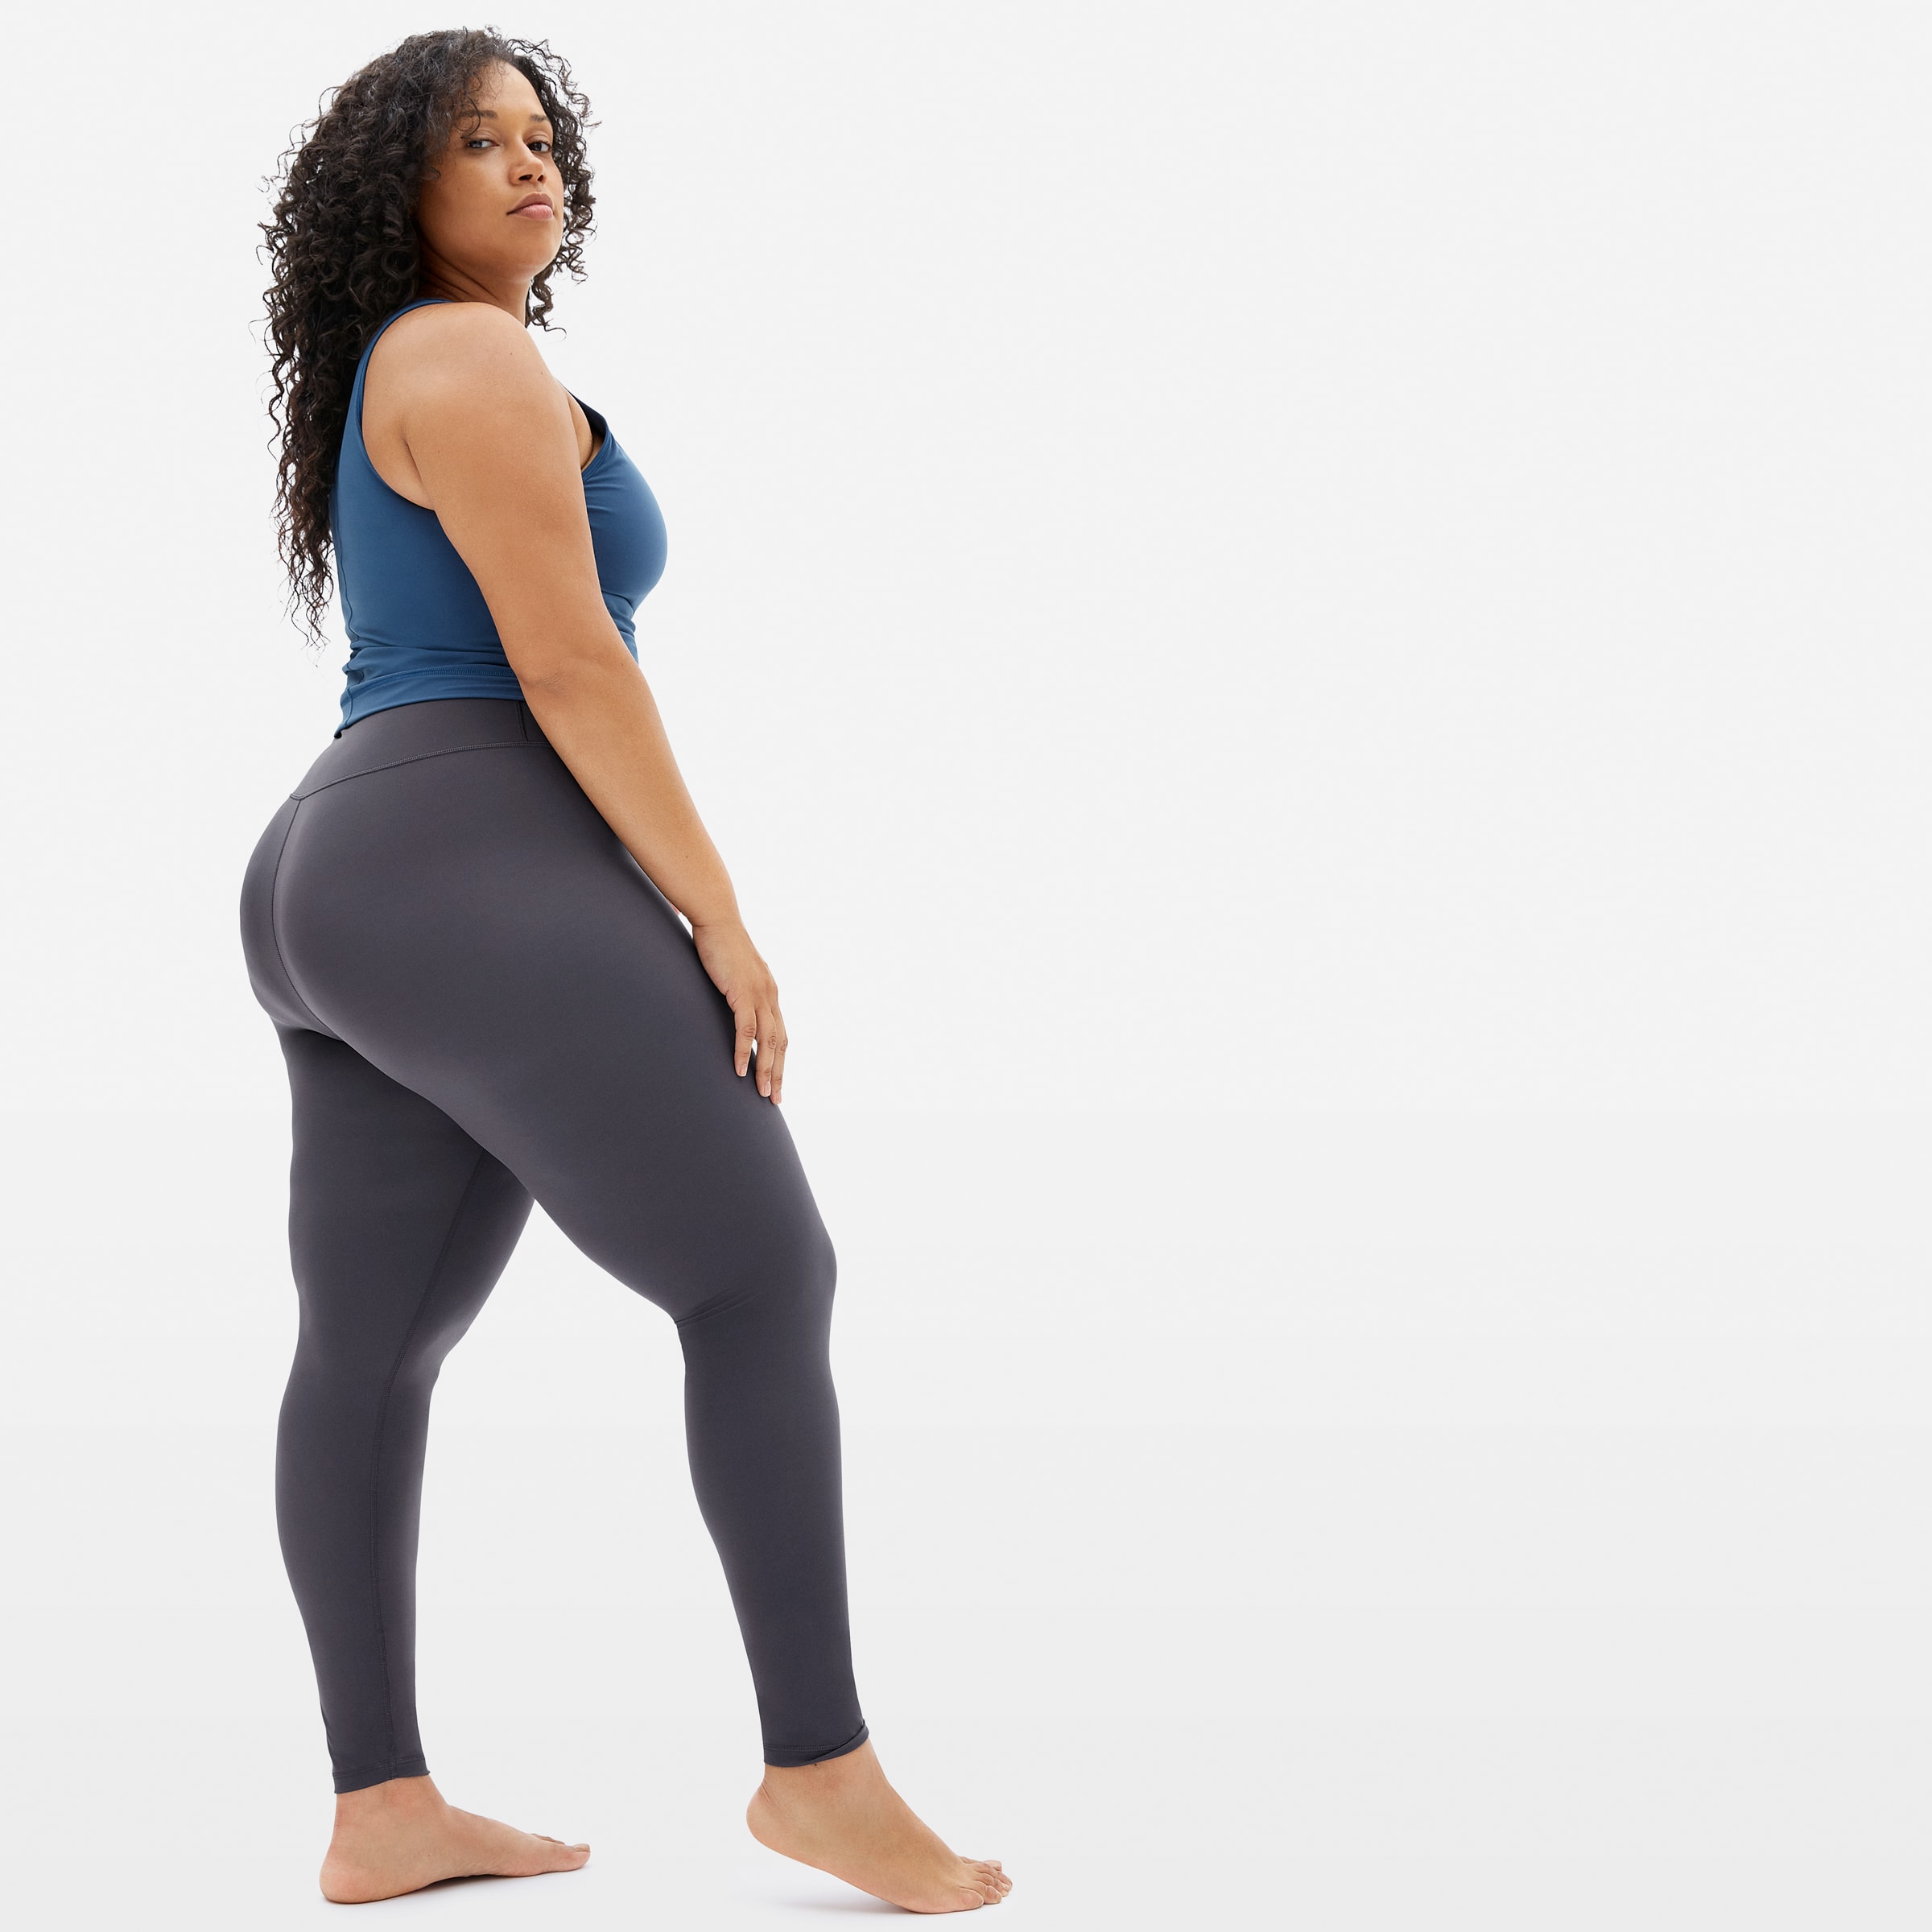 Everlane Perform Leggings Review: 7 Women Give Their Takes